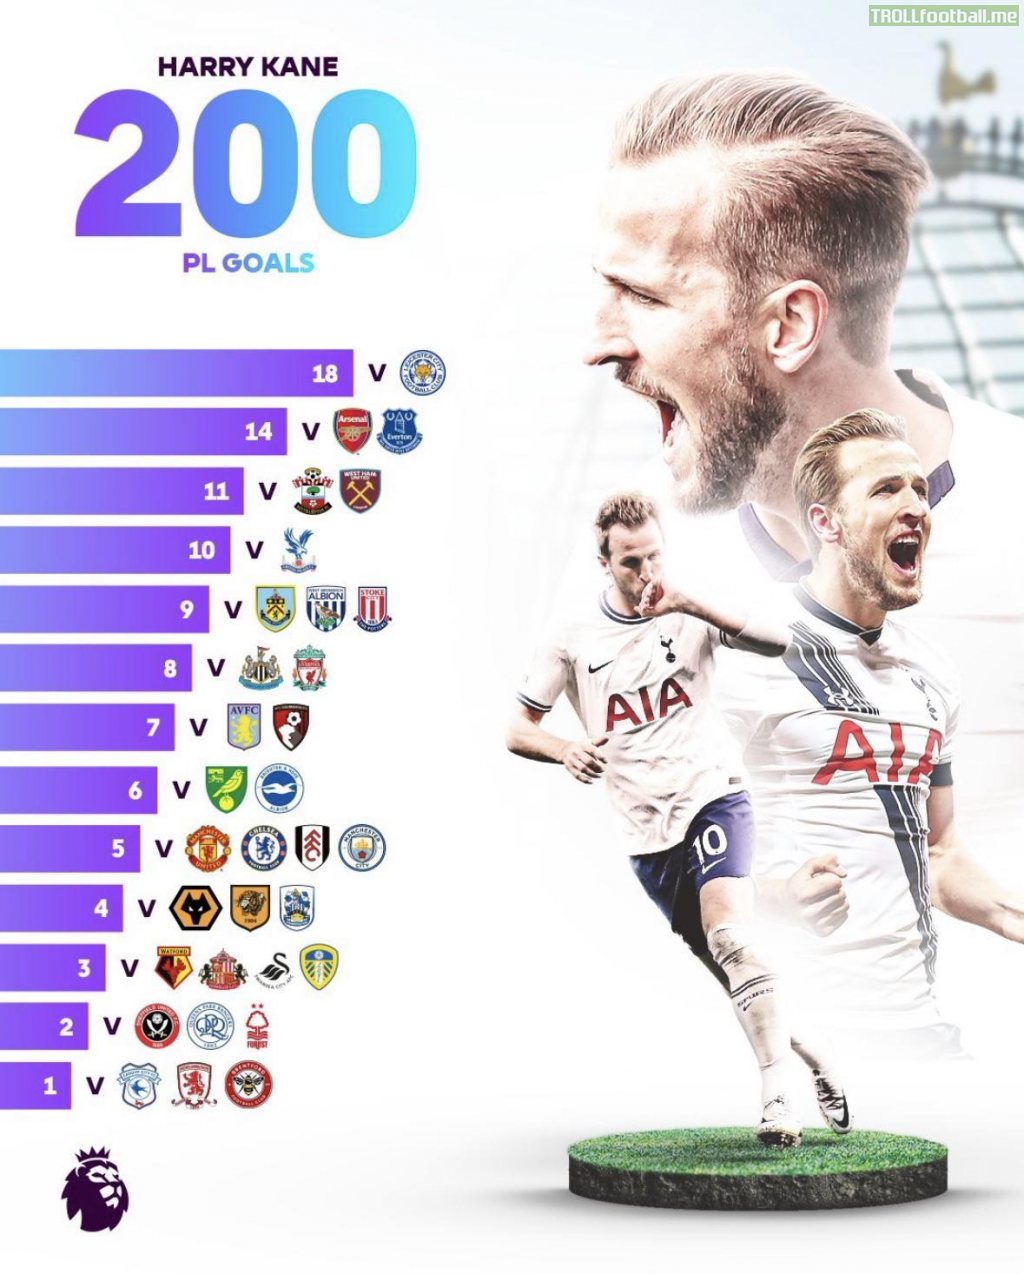 A breakdown of the opponents Harry Kane has scored against to reach 200 goals in the Premier League